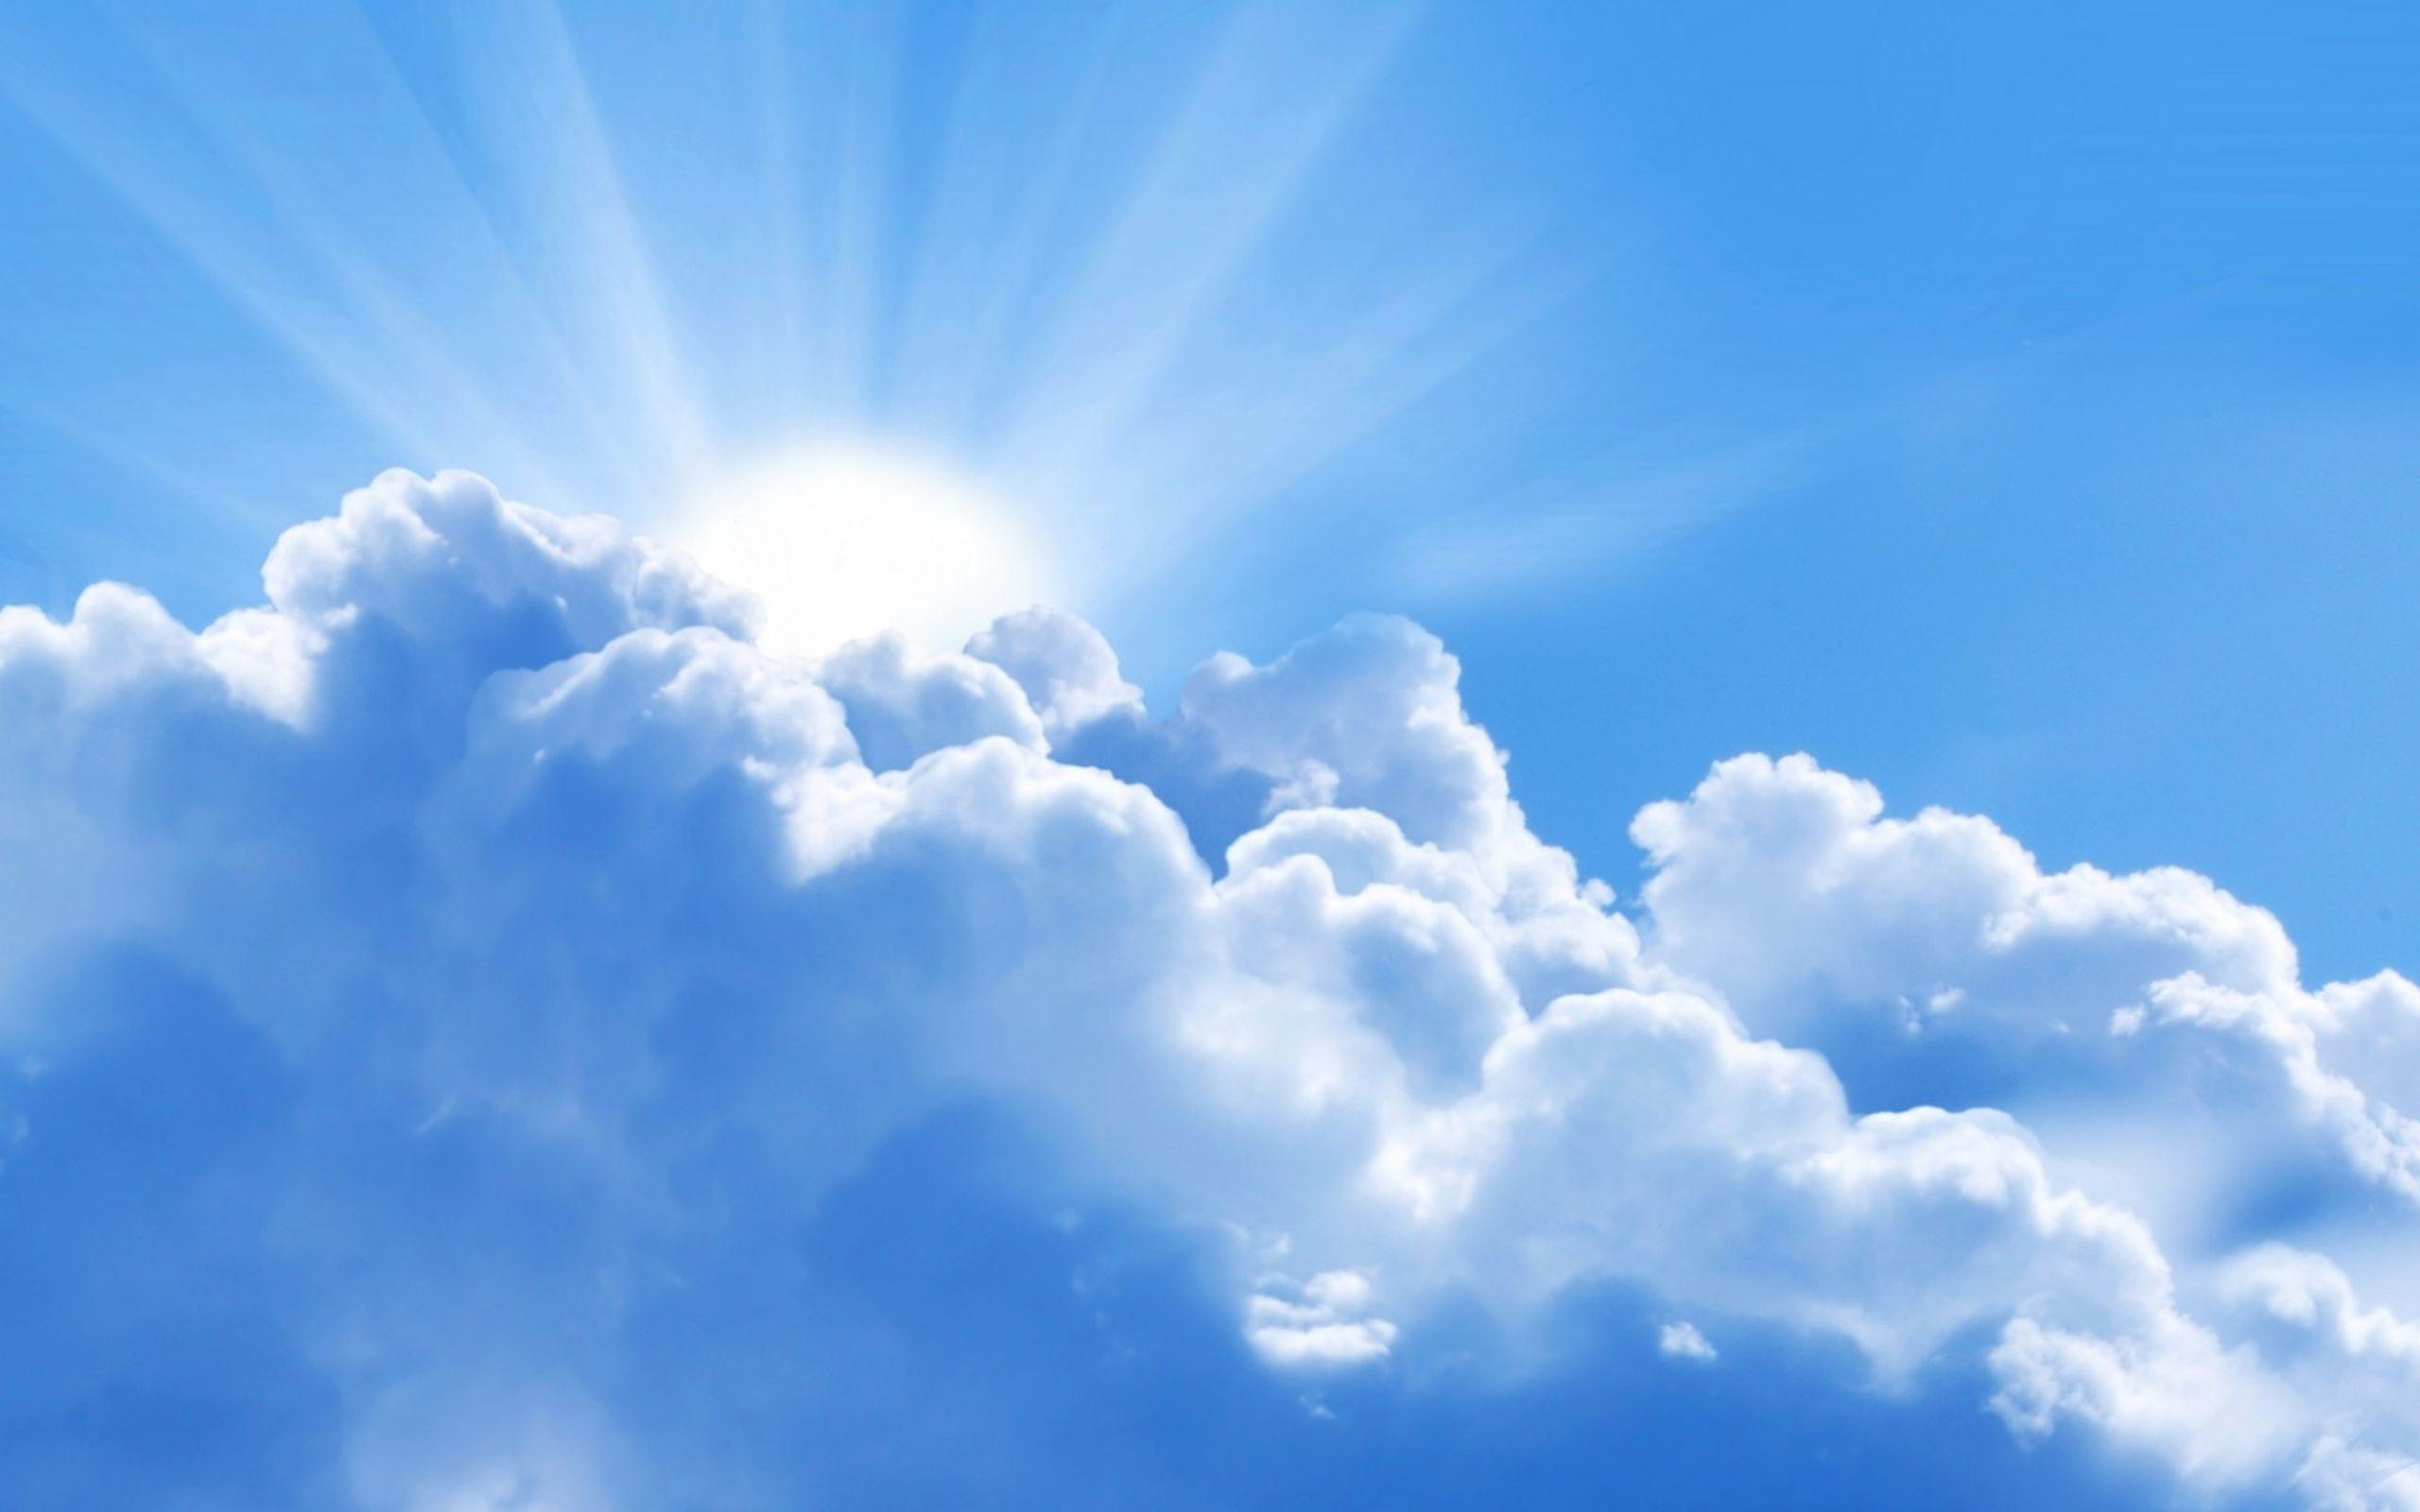 light blue background with clouds